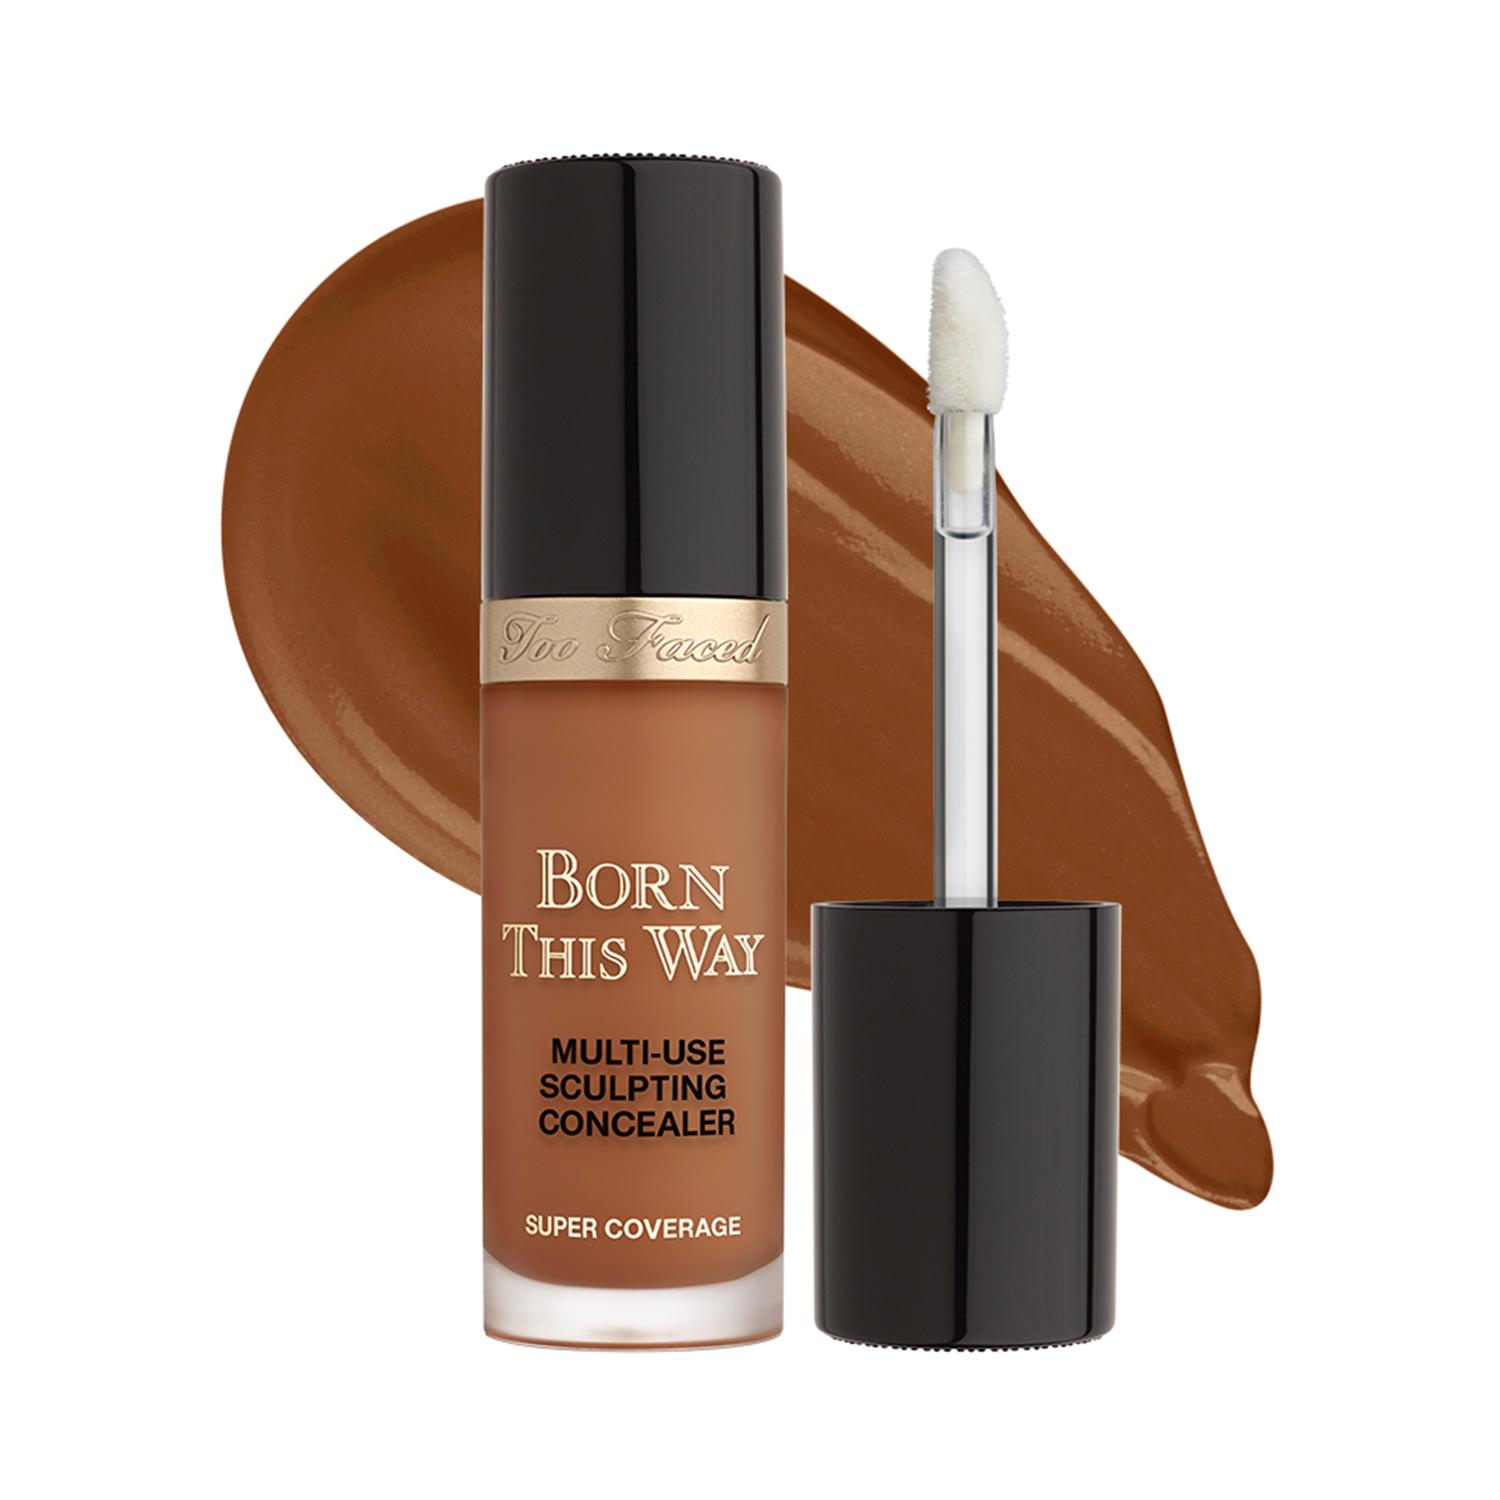 Too Faced Born This Way Super Coverage Multi Use Sculpting Concealer - Spiced Rum (13.5ml)